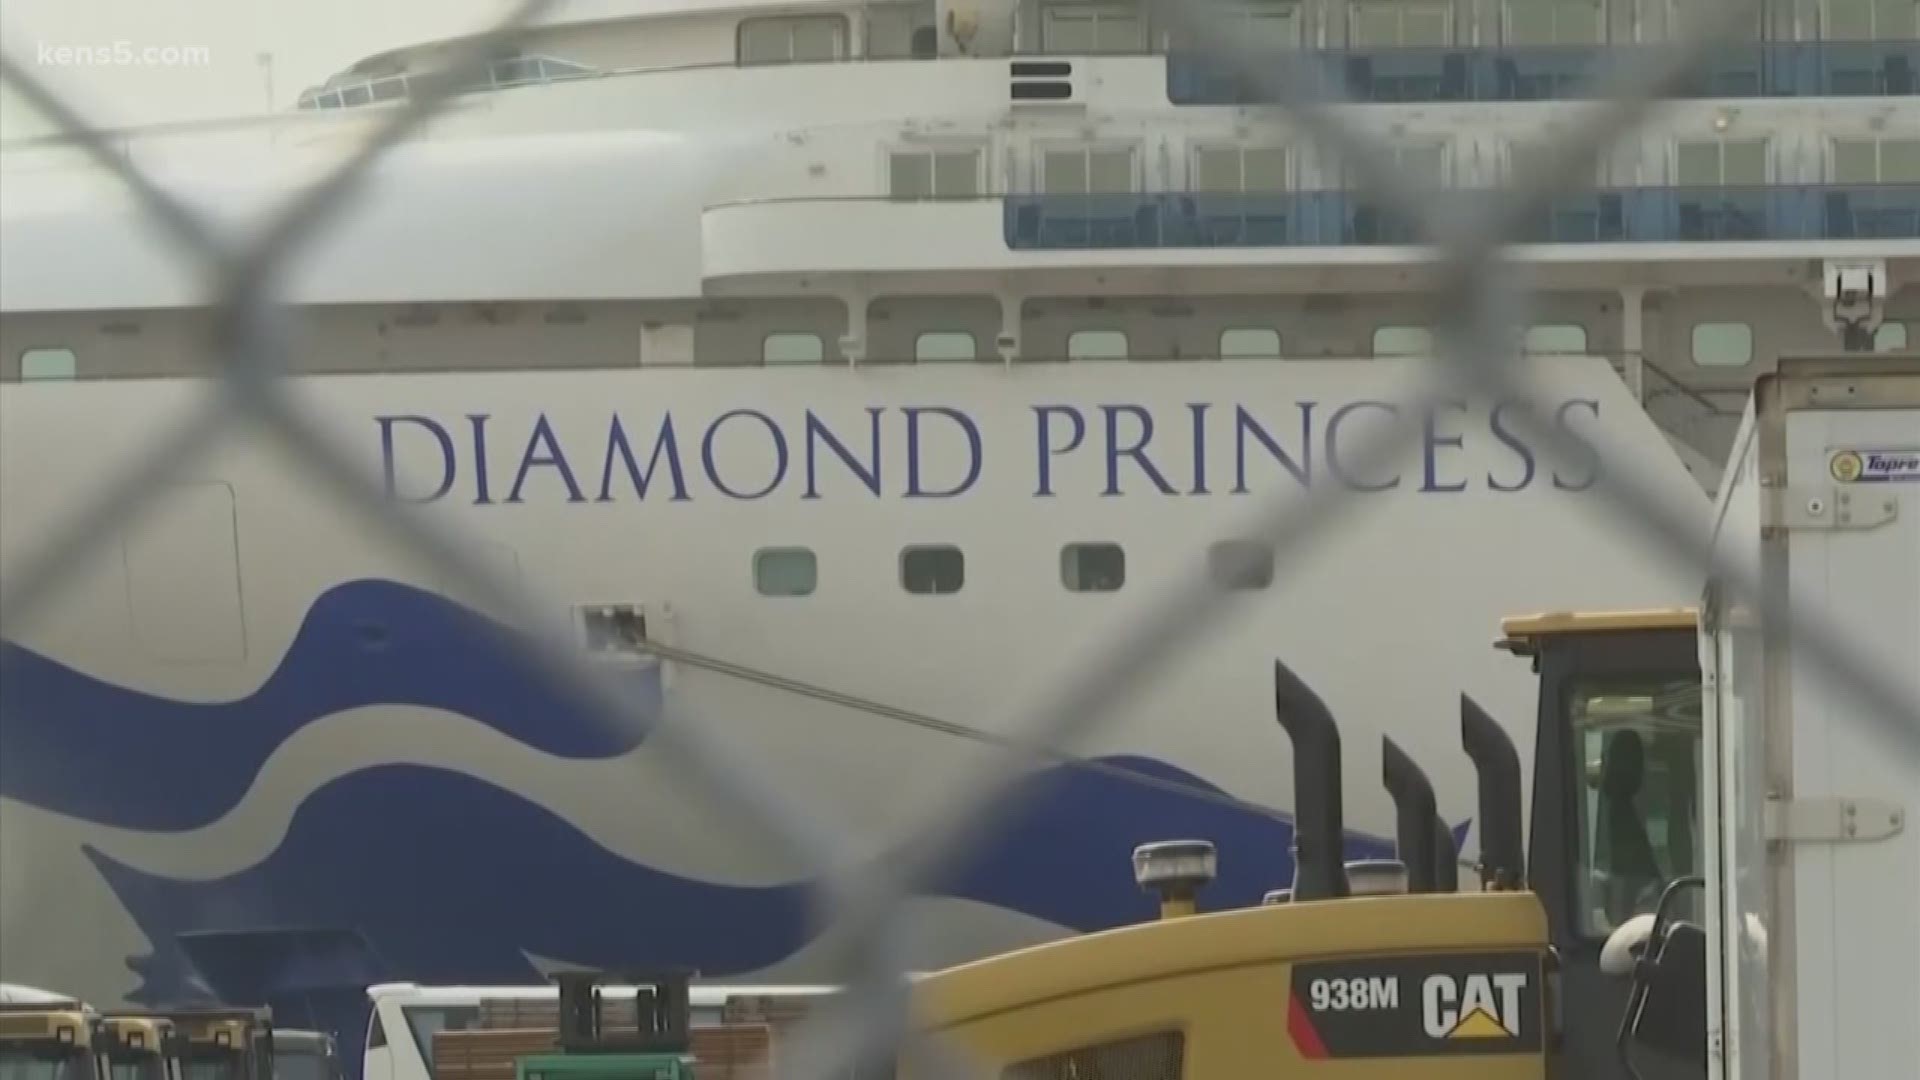 Five of the people from the Diamond Princess cruise ship arrived in San Antonio last week are in isolation at the Texas Center for Infectious Disease.